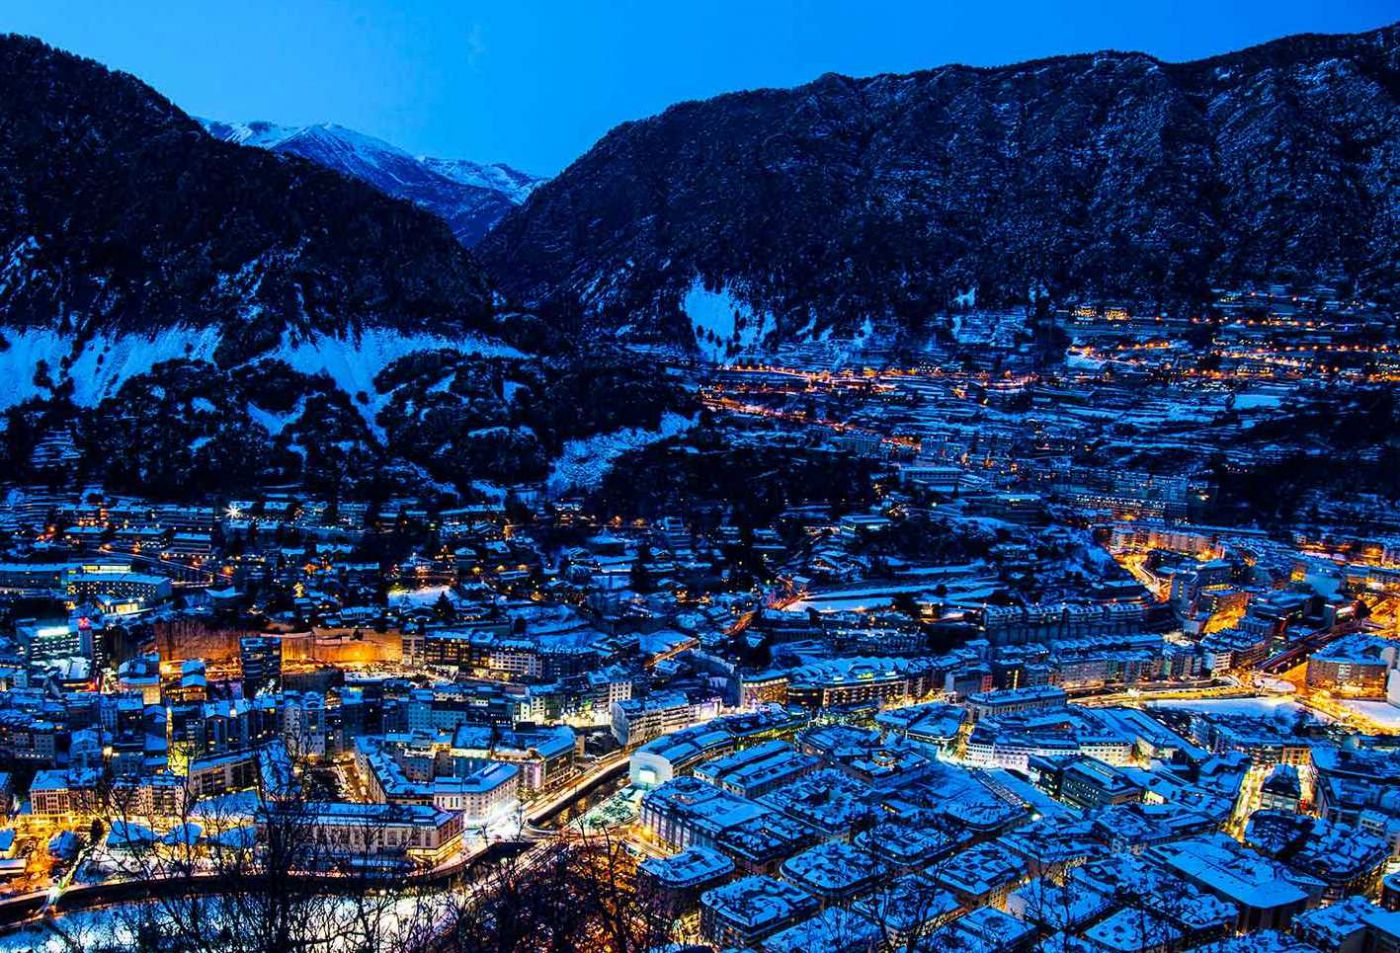 🗽 What Famous Landmark Should You Visit Next Based on Your A-Z Travel Bucket List? Andorra